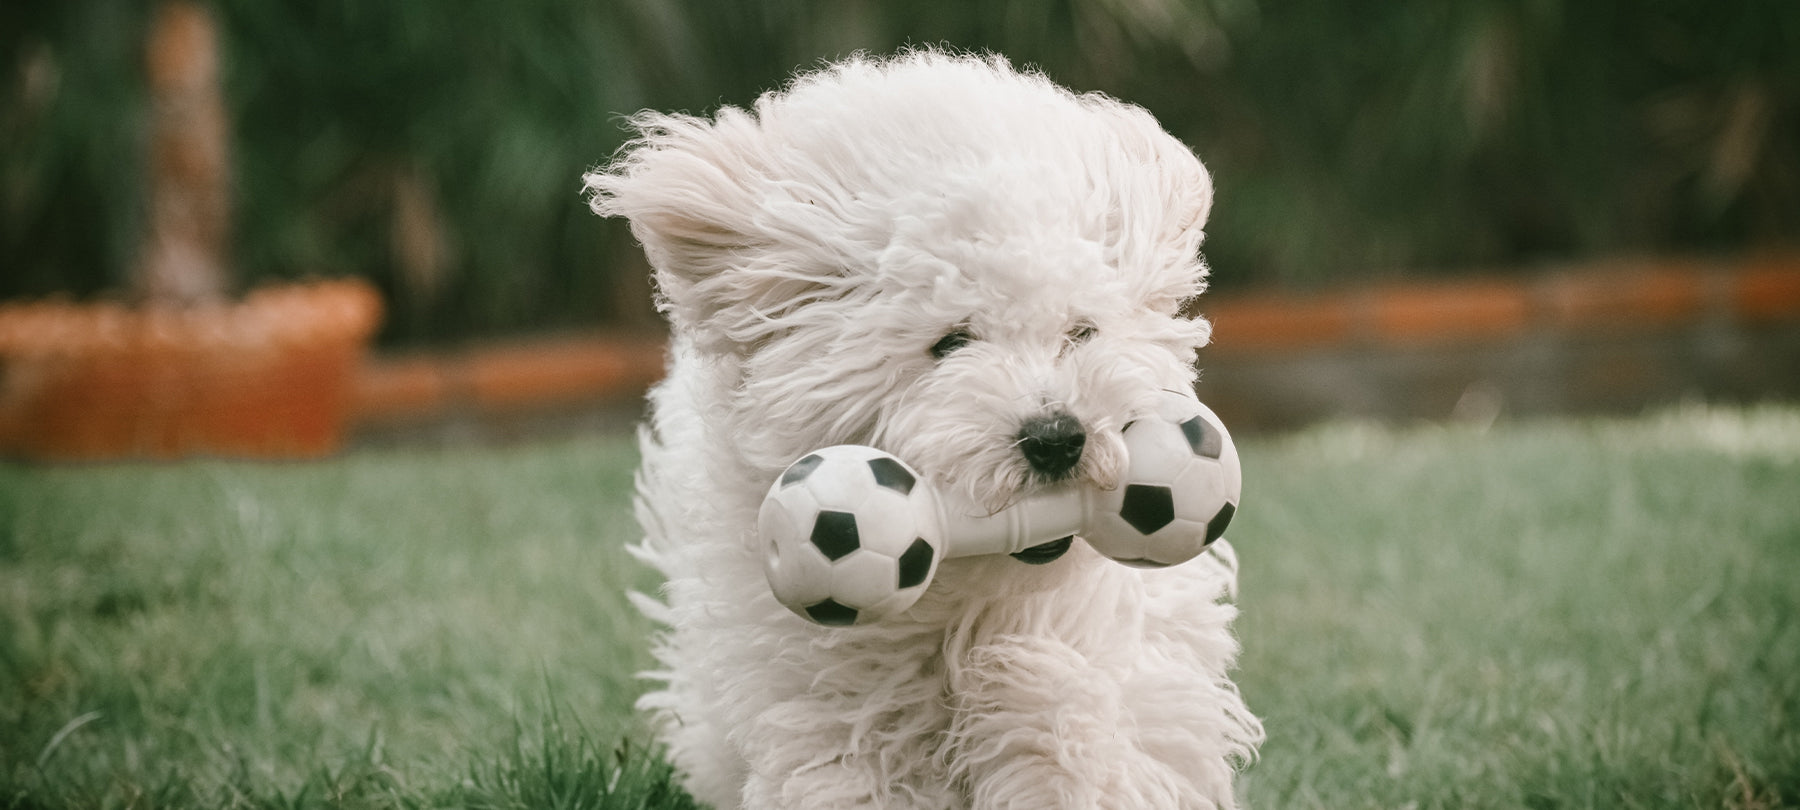 Small white dog with a toy in its mouth.